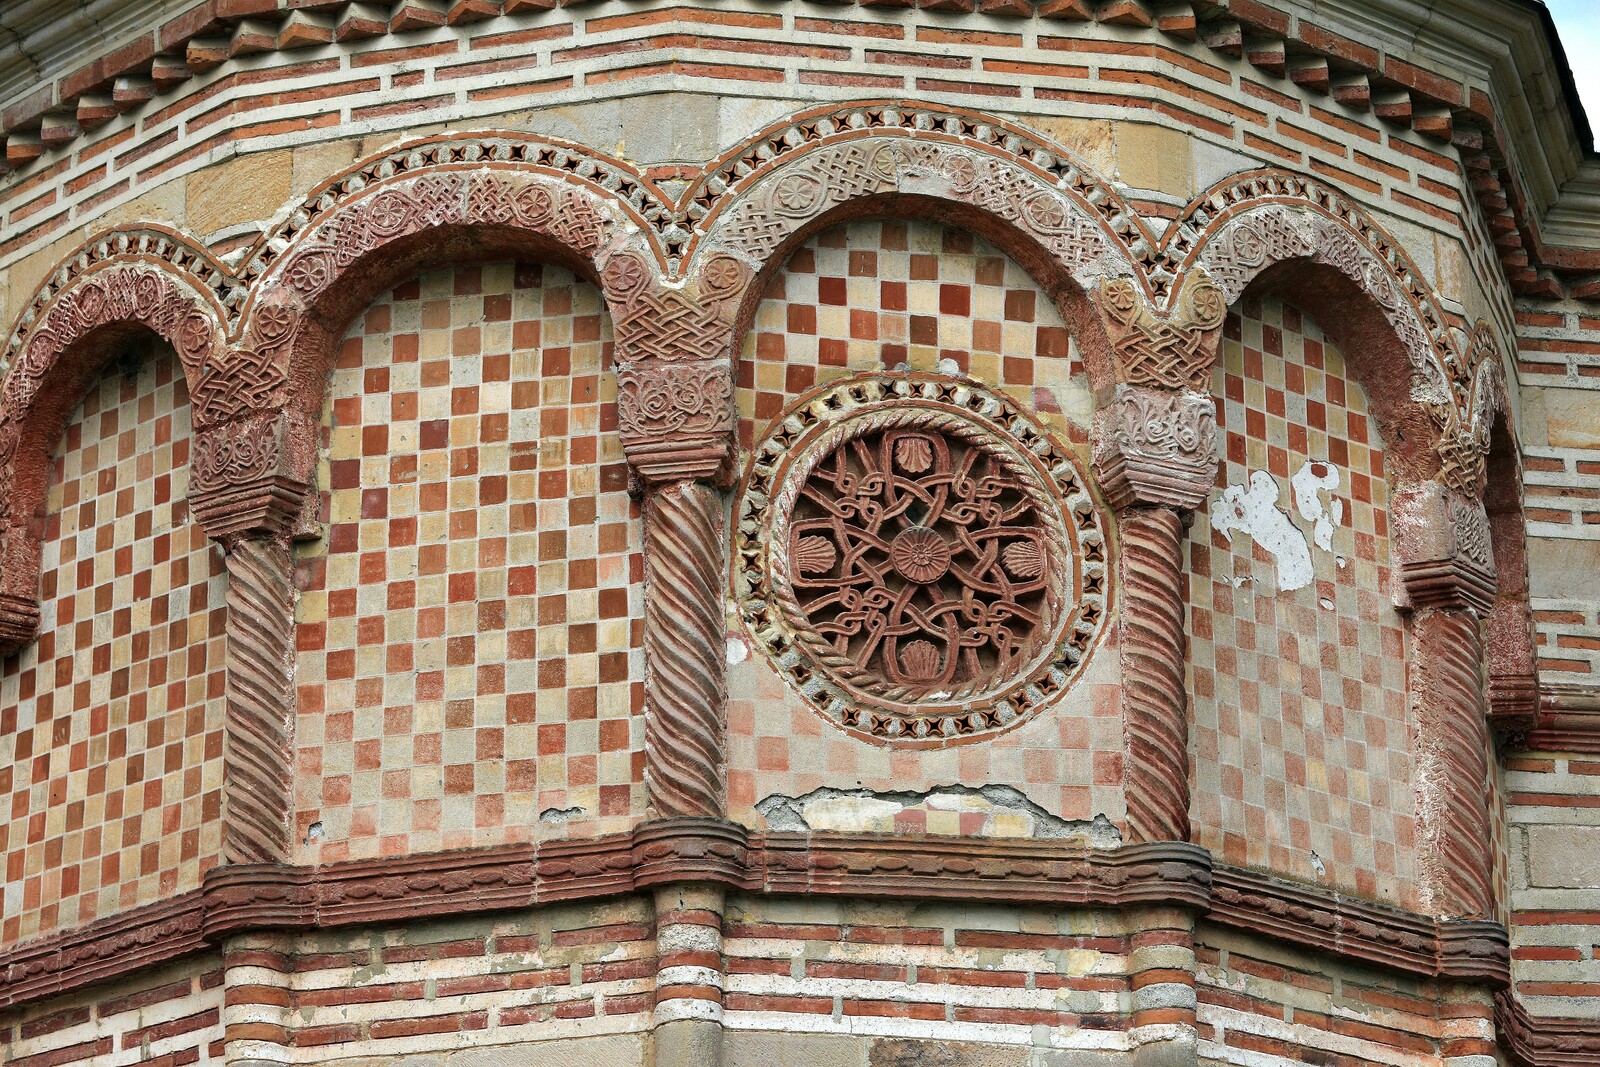 The Blind Arcade of the Altar Apse